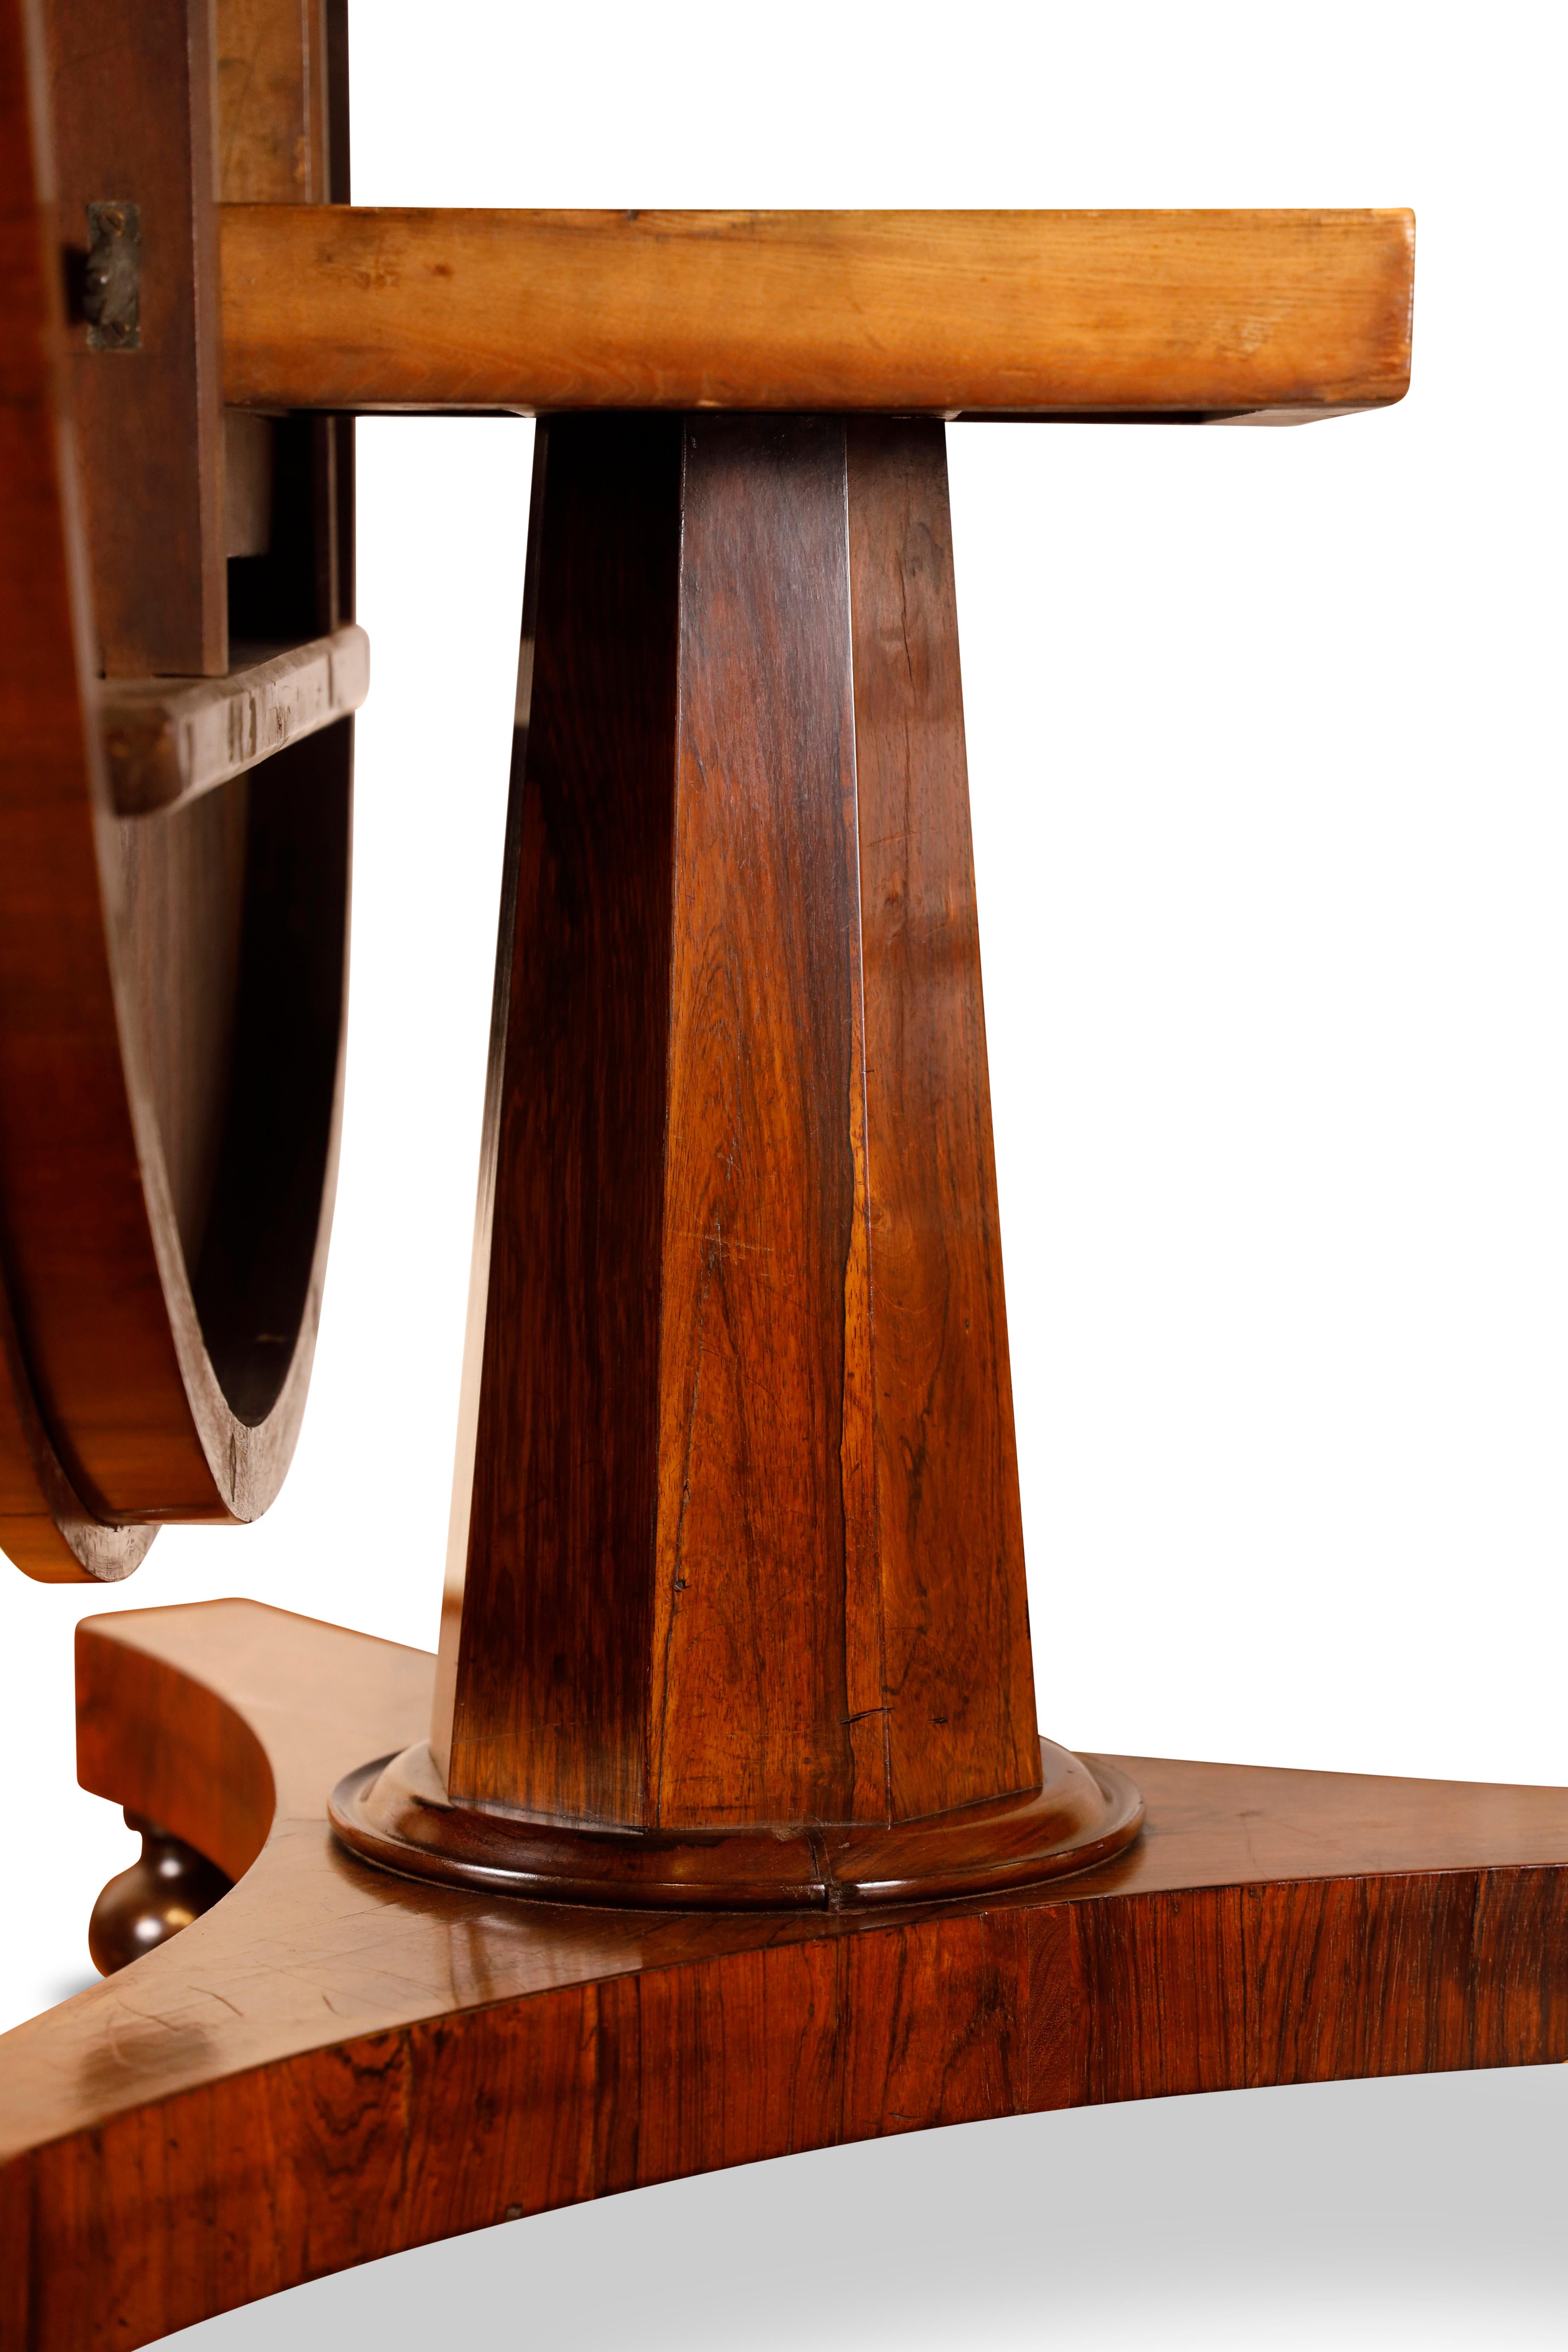 George IV rosewood circular center table with tapering octagonal column ending in triped platform base raised on bun feet with hidden casters.  Table tilts up.